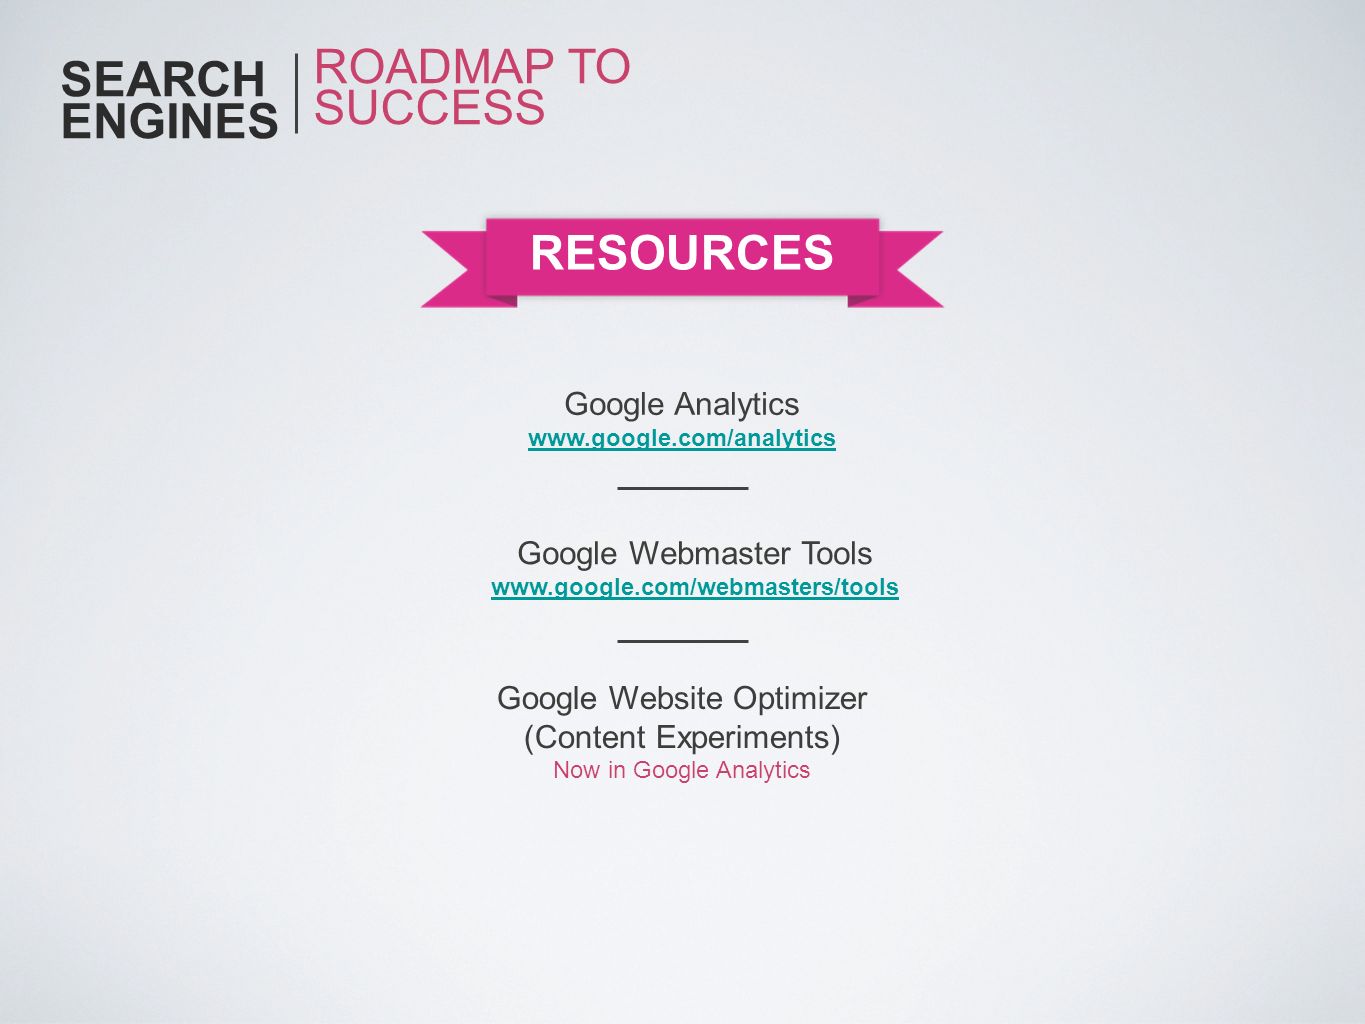 SEARCH ENGINES ROADMAP TO SUCCESS RESOURCES Google Analytics